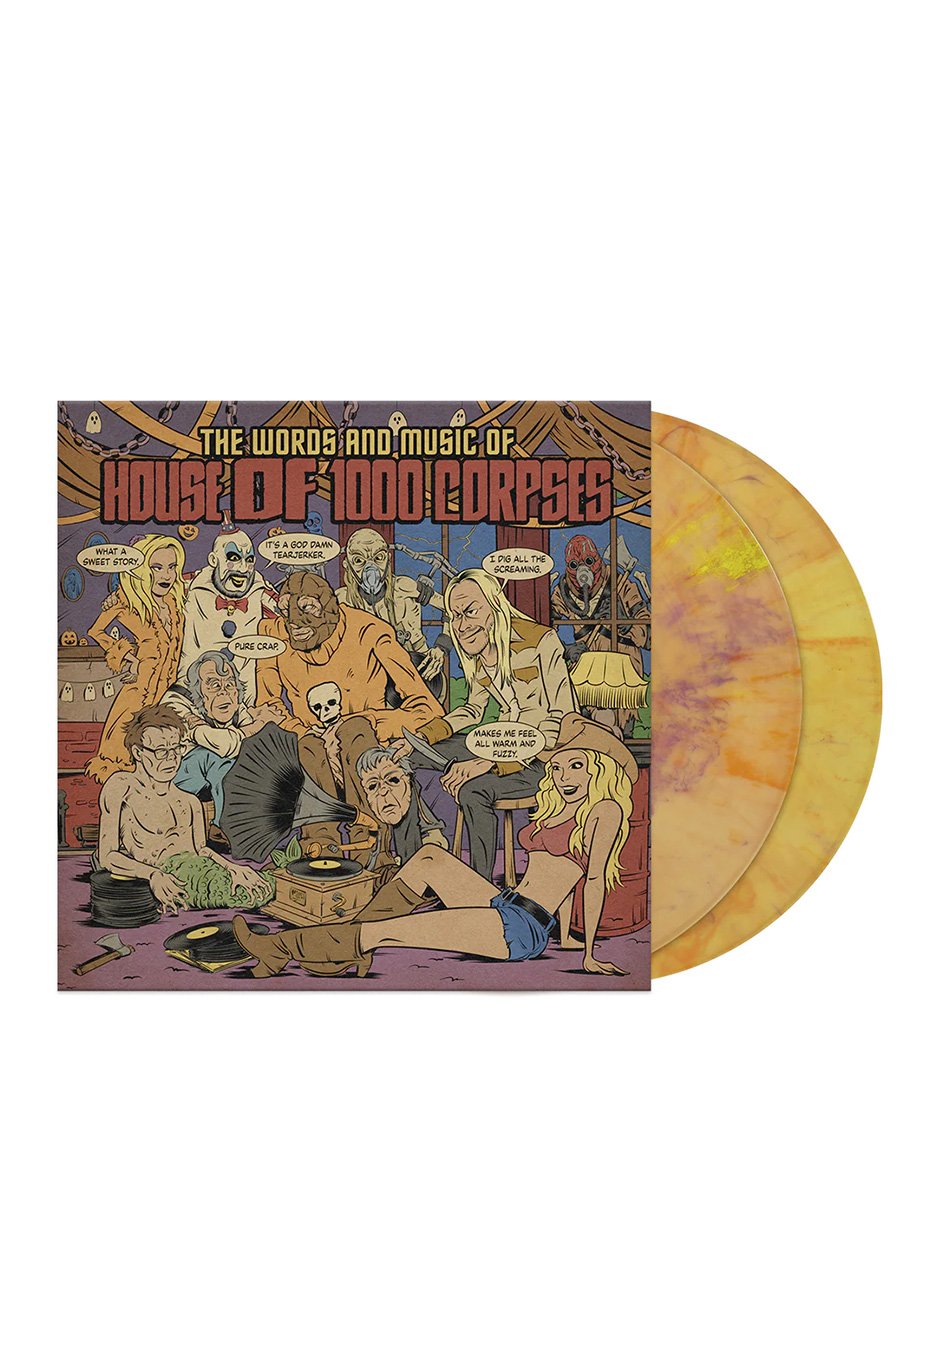 Rob Zombie - The Words & Music Of House Of 1000 Corpses Ltd. Orange/Purple/Green - Colored 2 Vinyl